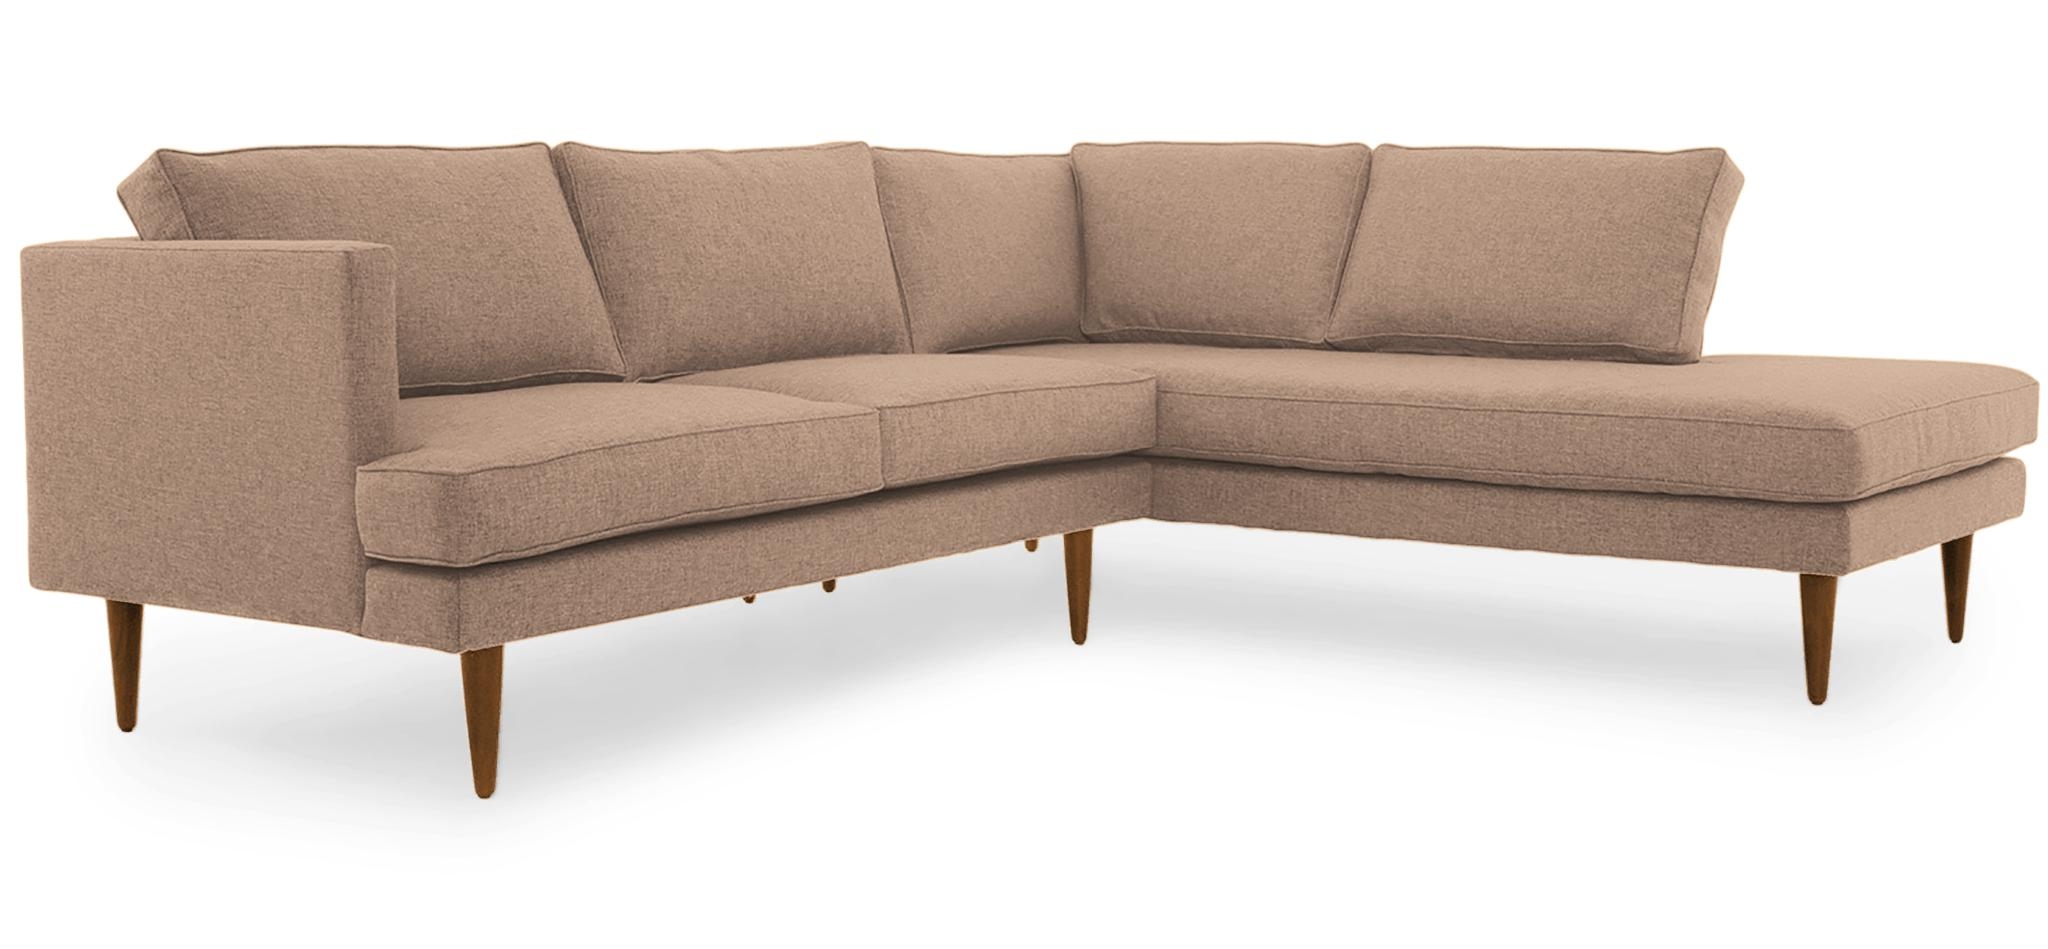 Pink Preston Mid Century Modern Sectional with Bumper (2 piece) - Royale Blush - Mocha - Left - Image 1